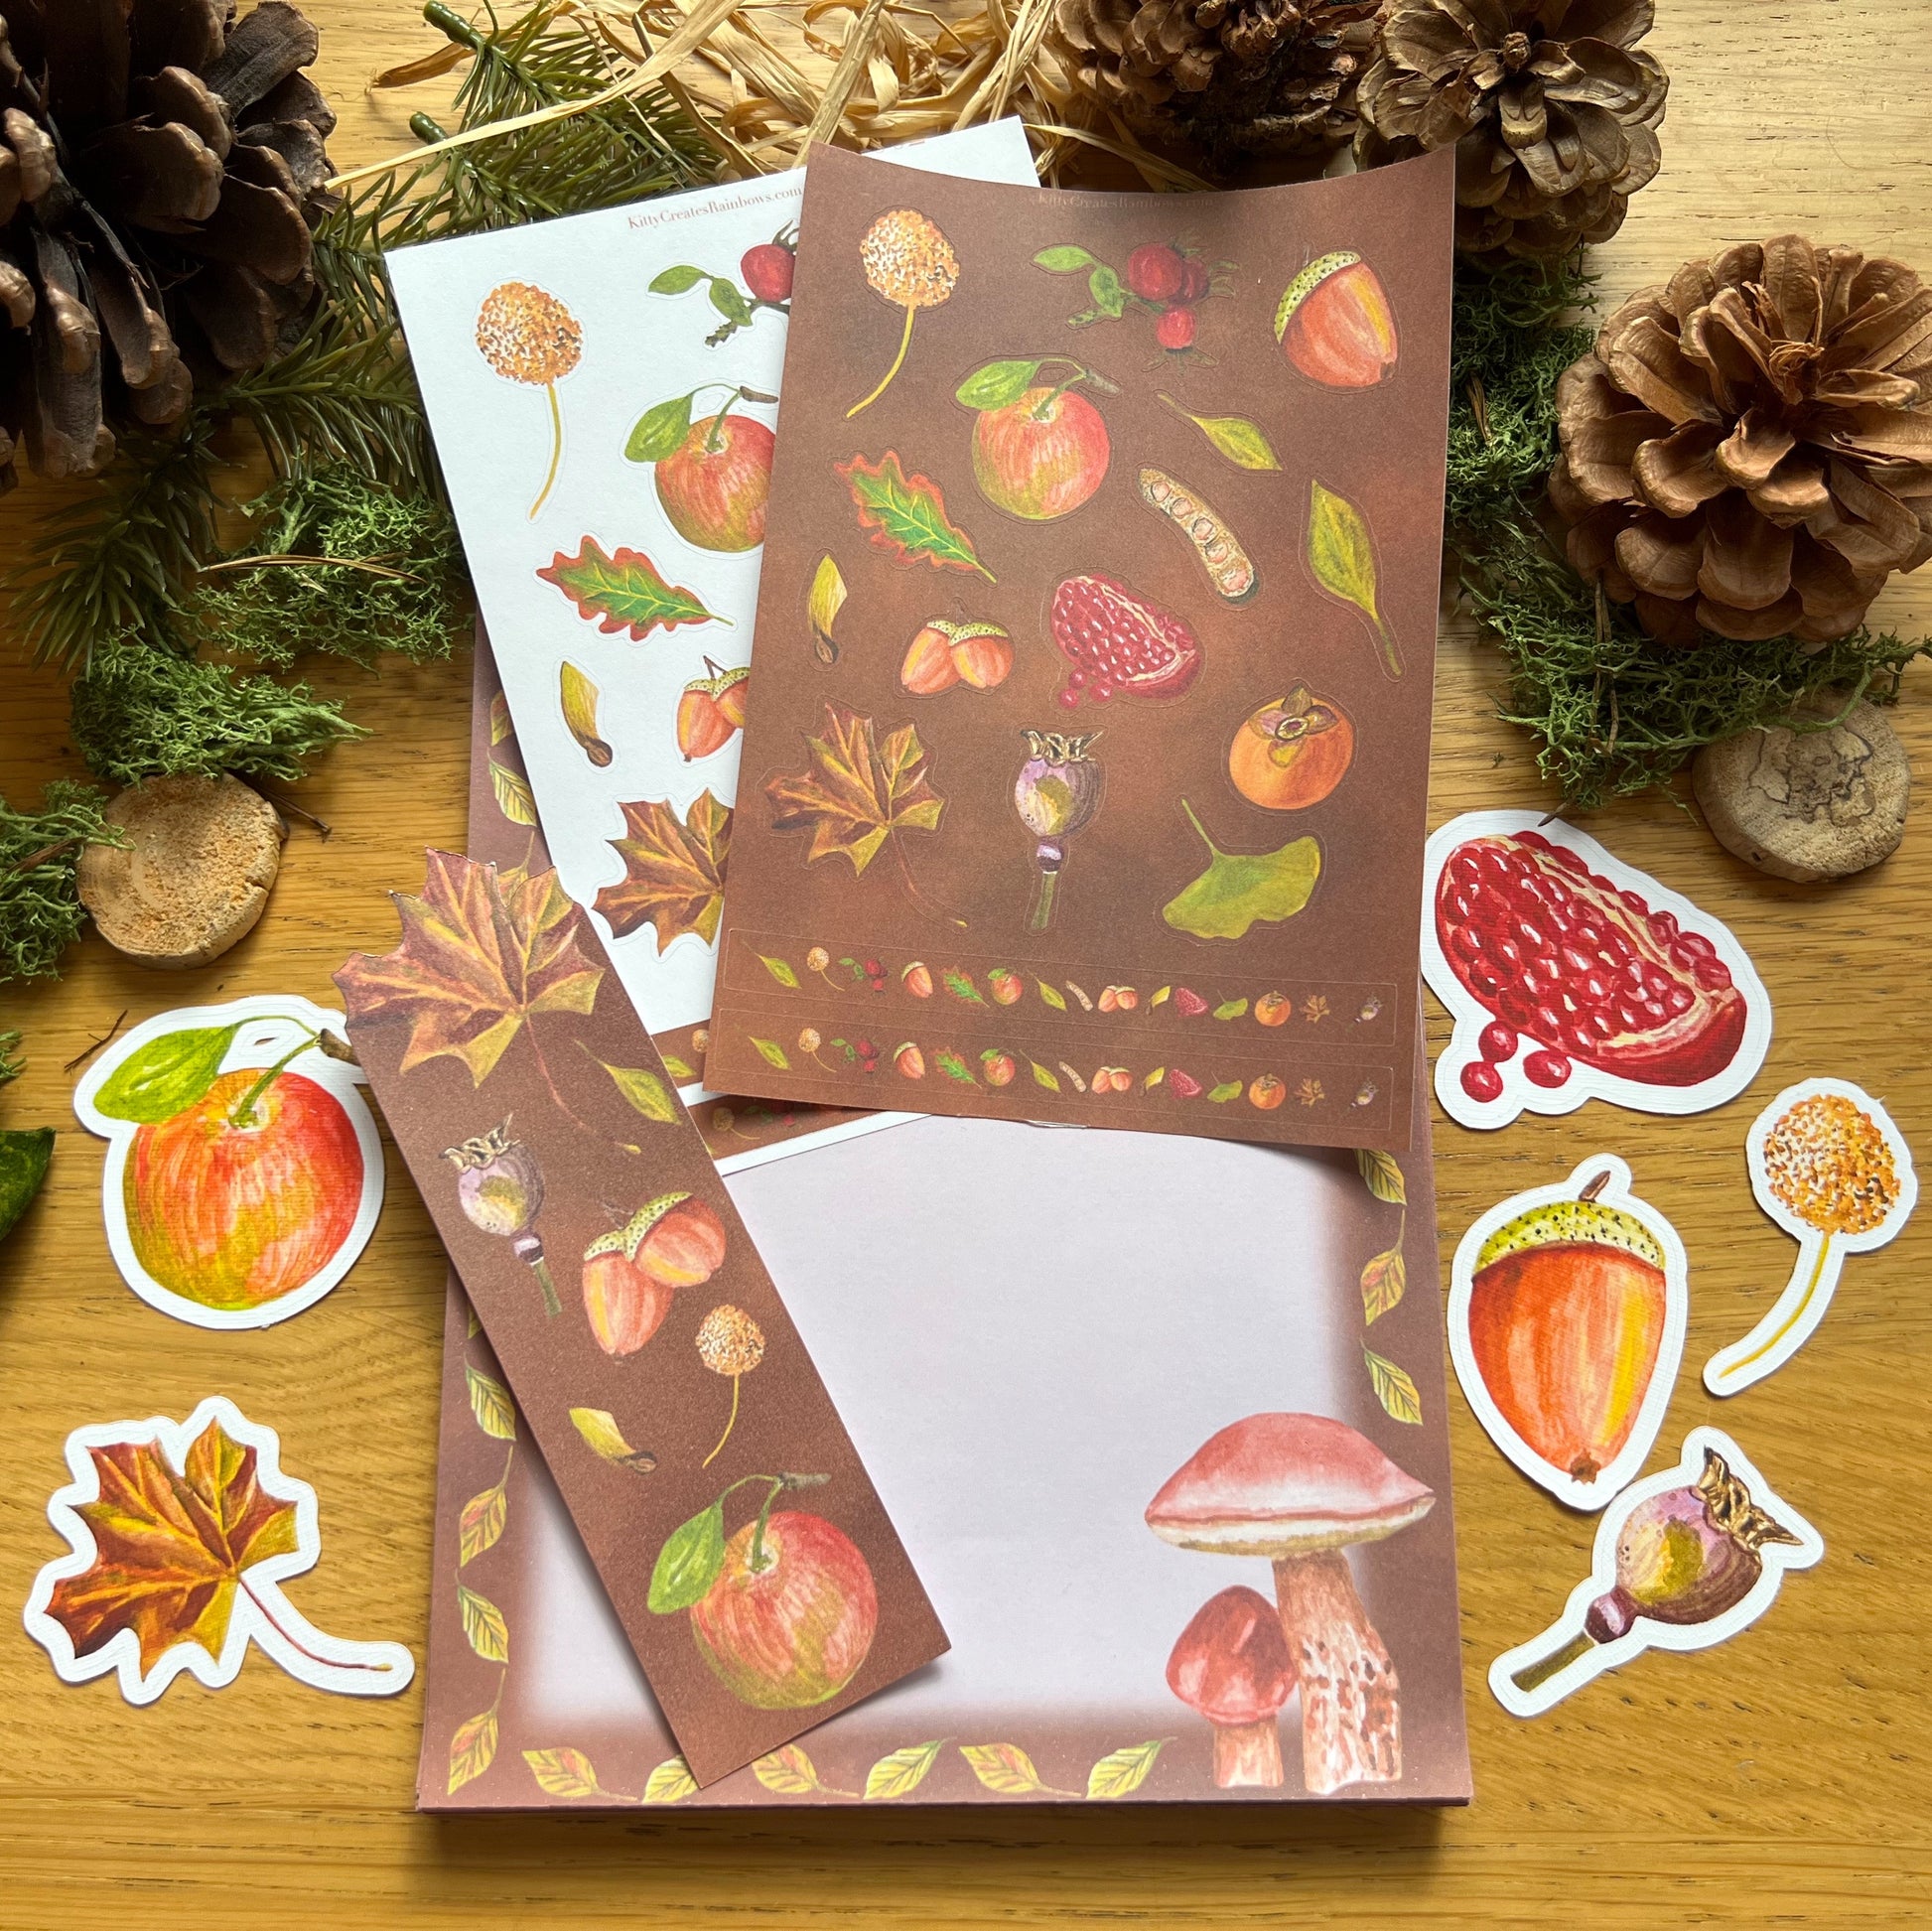 Fall forage stationery set flay lay on decorated wooden table